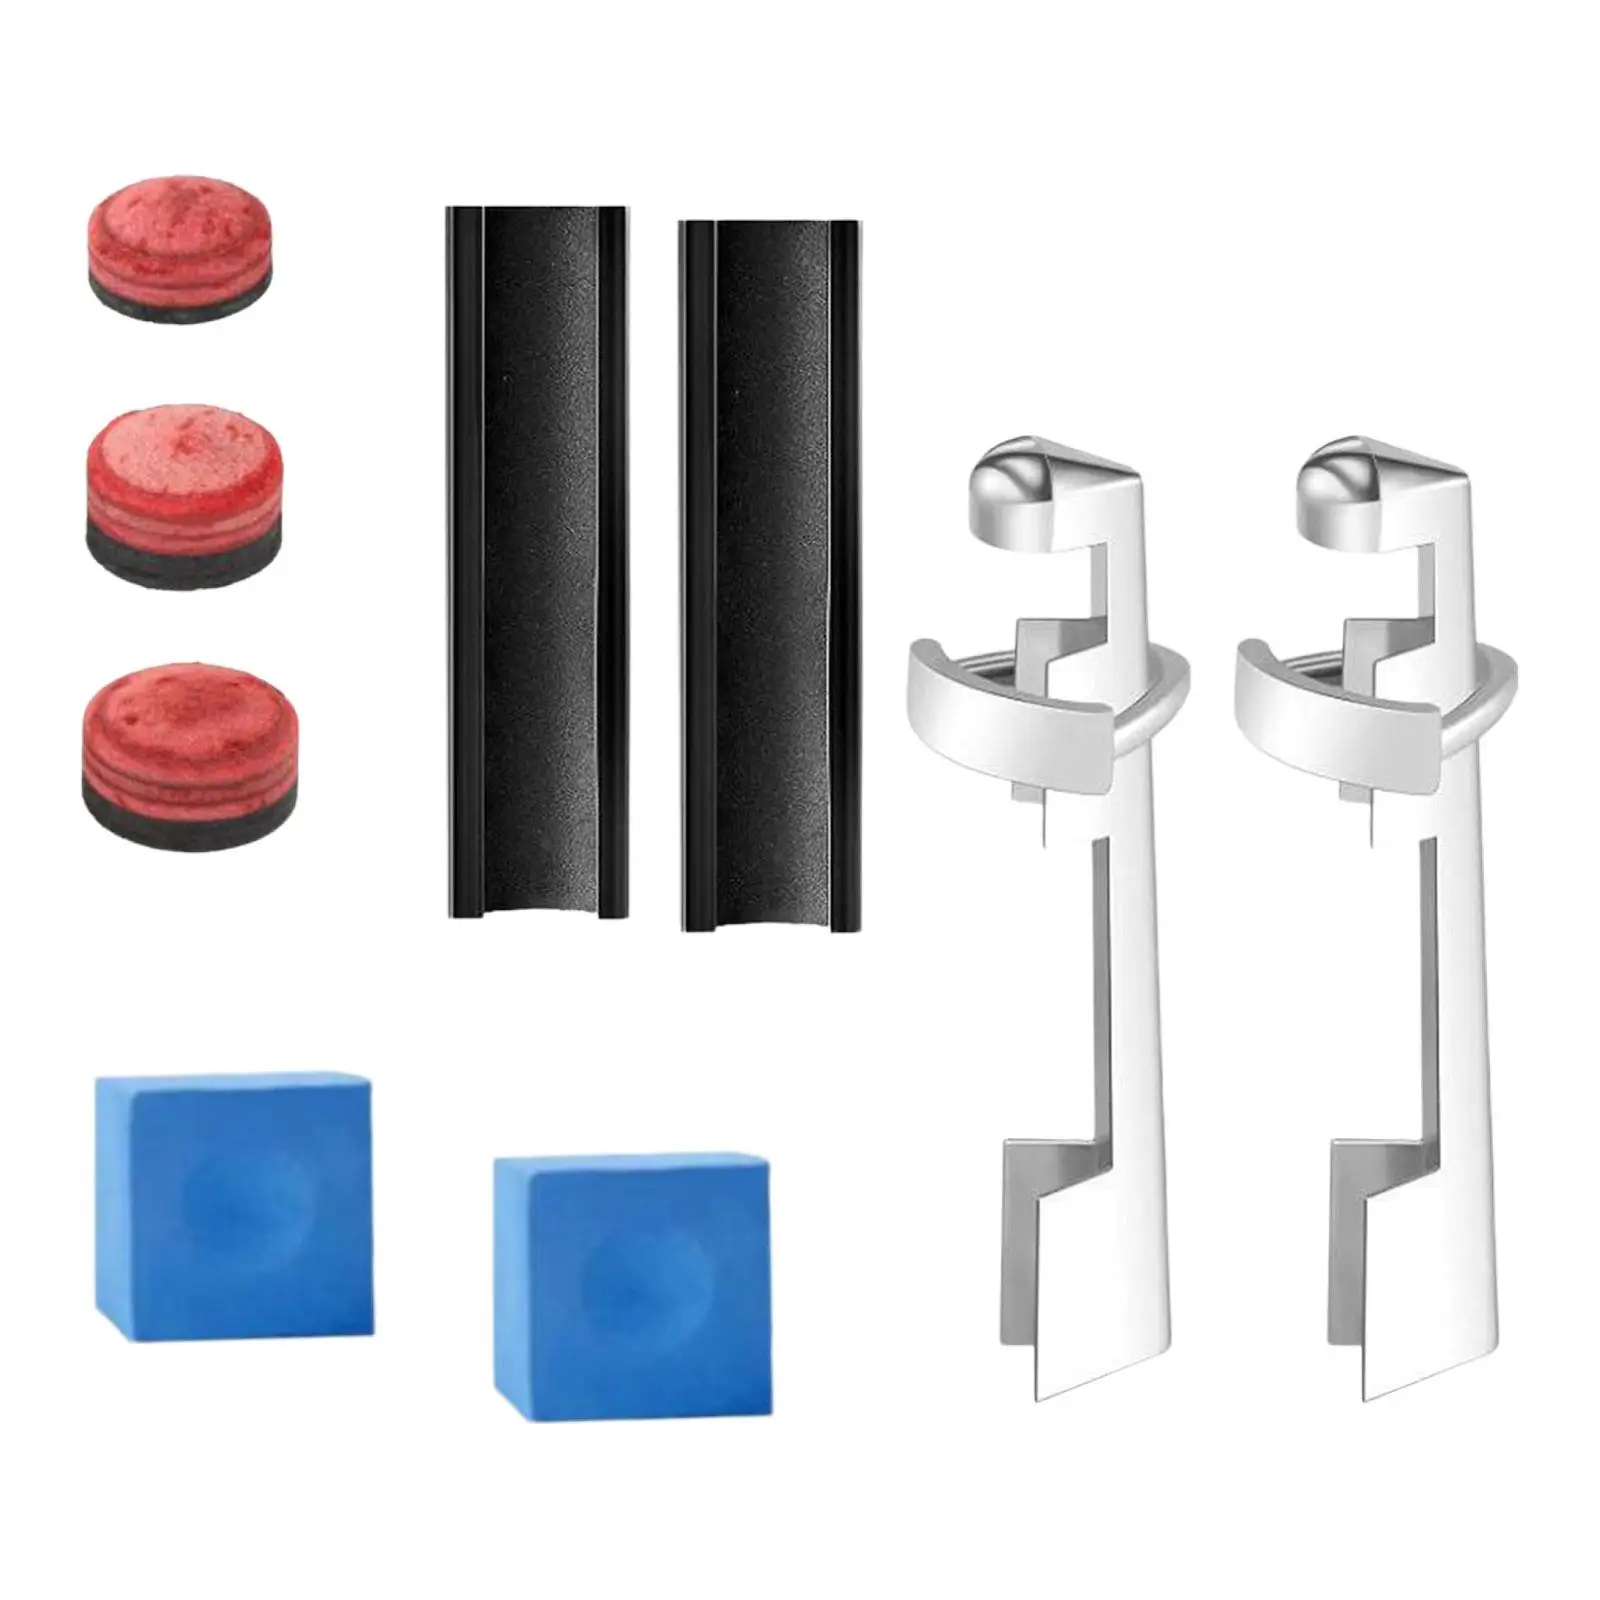 9x Billiards Cue Stick Pool Cue Tip Repair Kit Billiard Cue Tips Replacement Kit for Practice Pool Table Beginners Playing Game